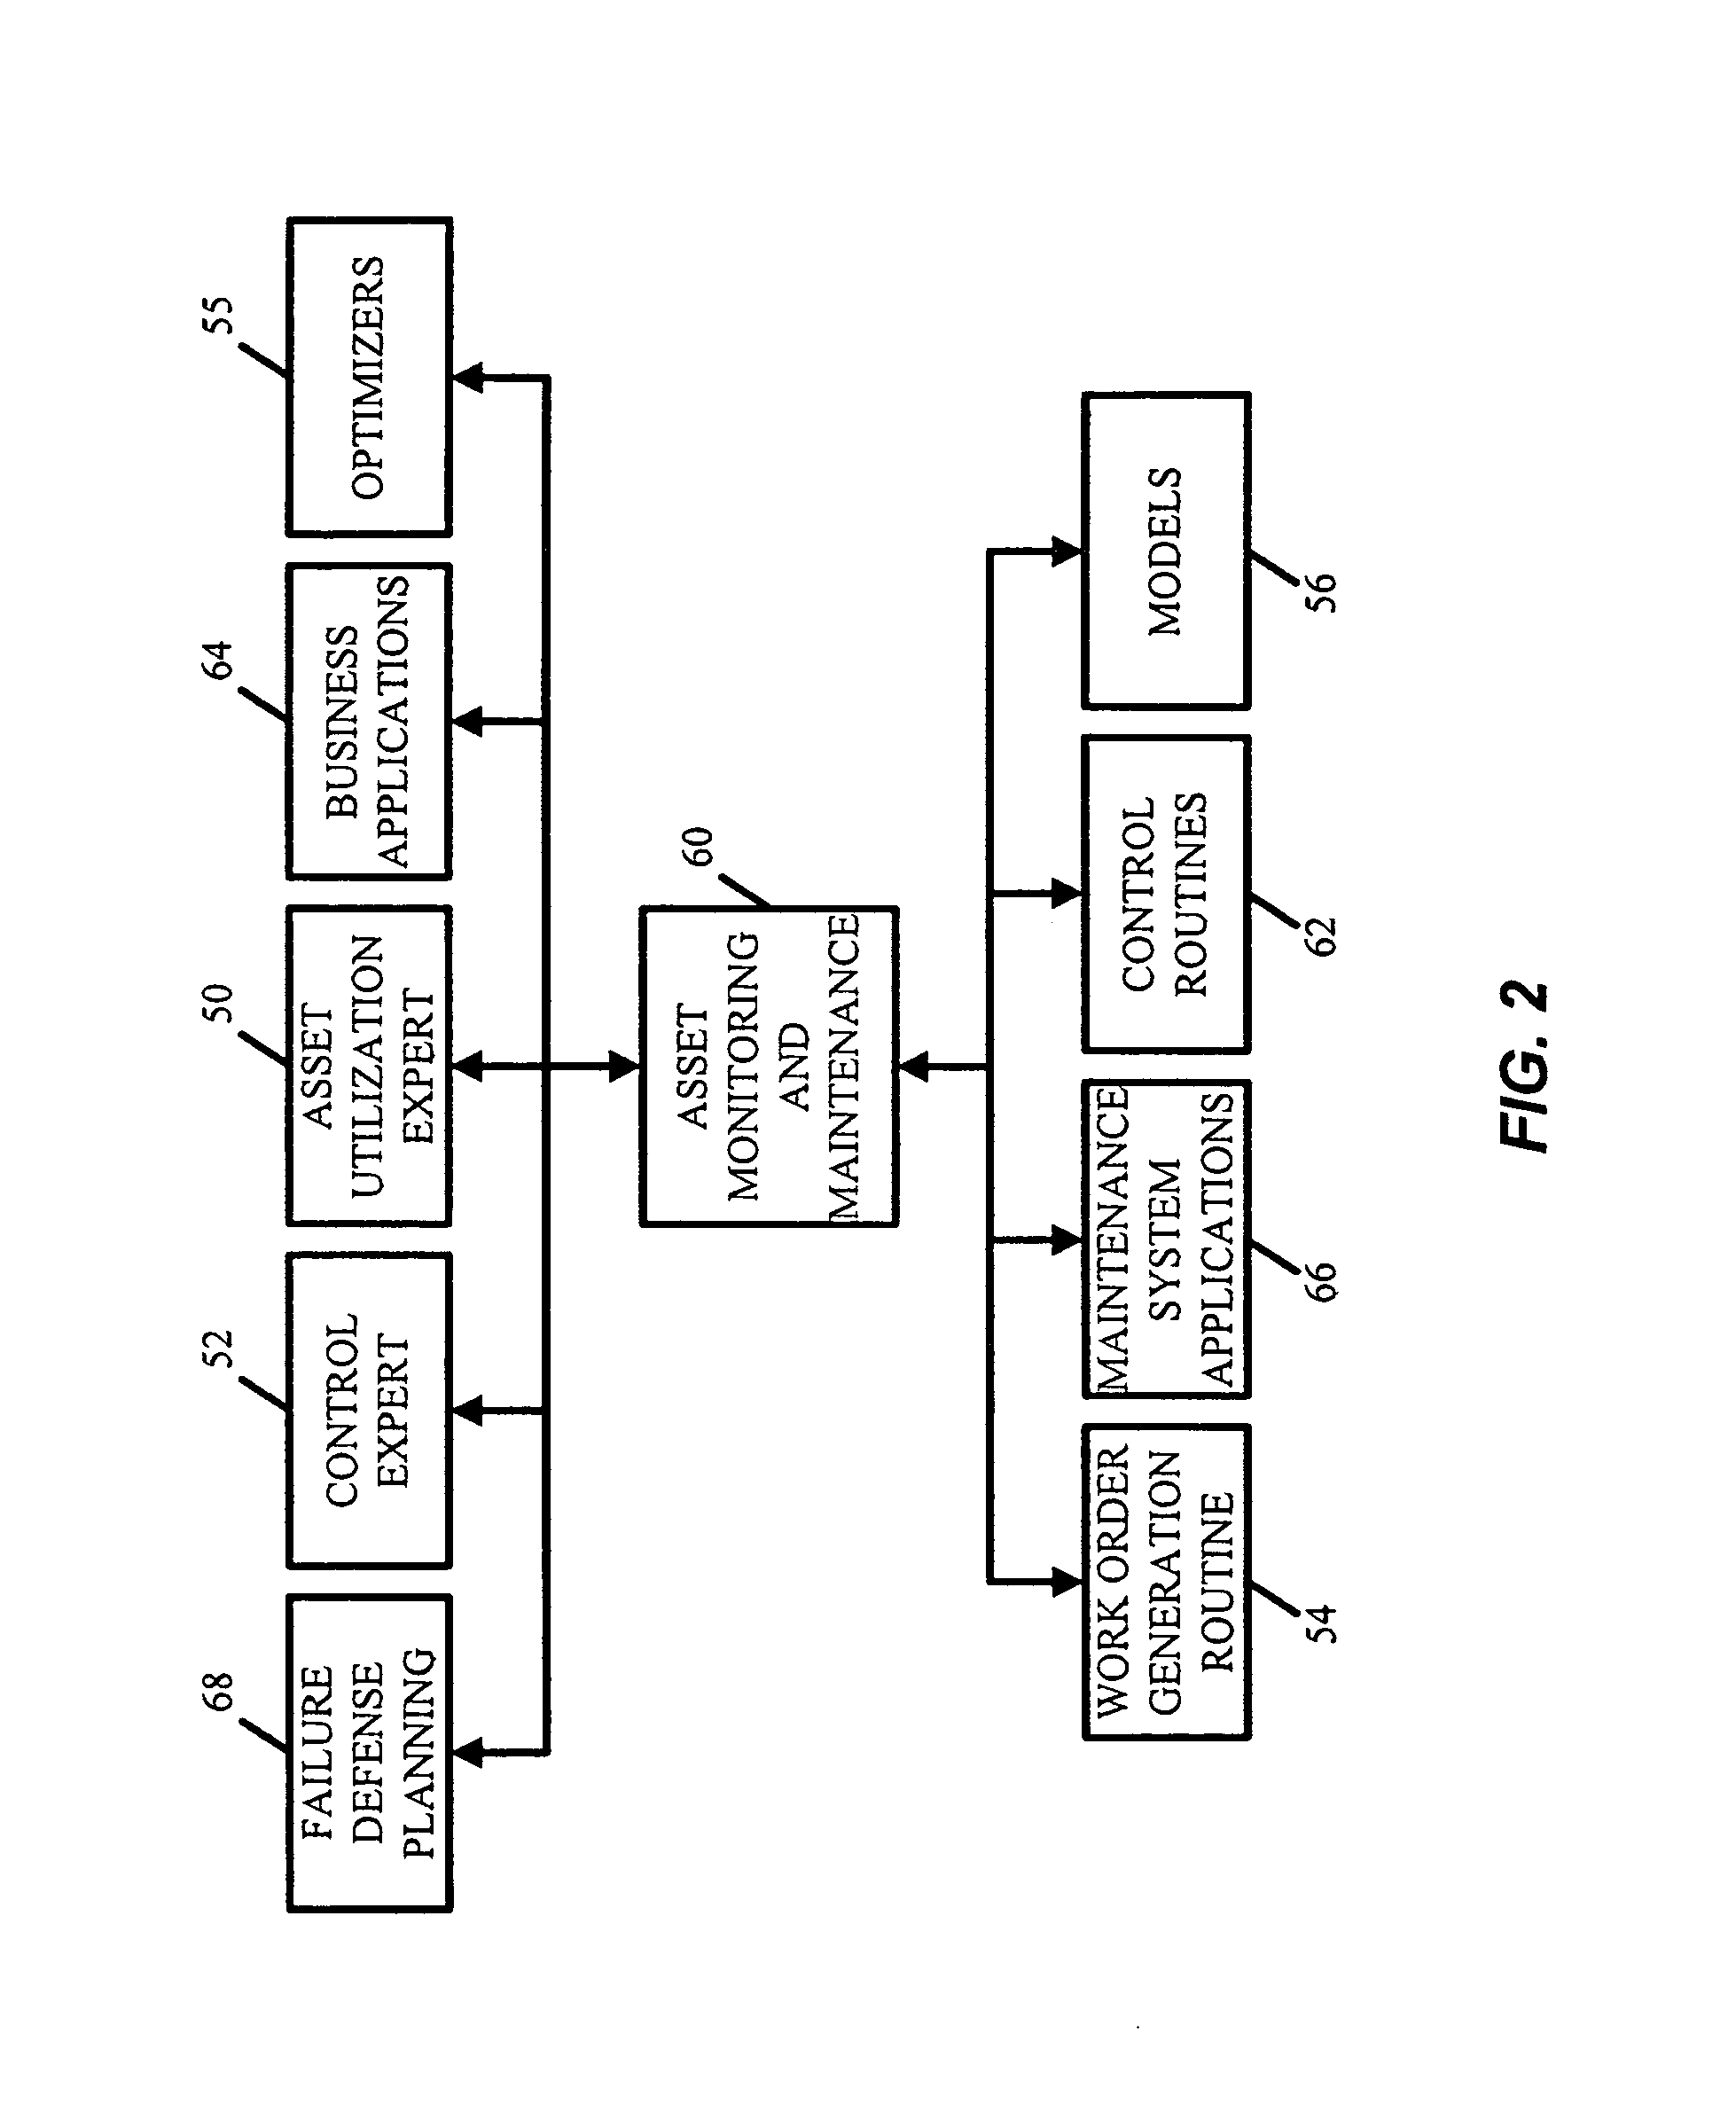 Method and apparatus for performing a function in a process plant using monitoring data with criticality evaluation data